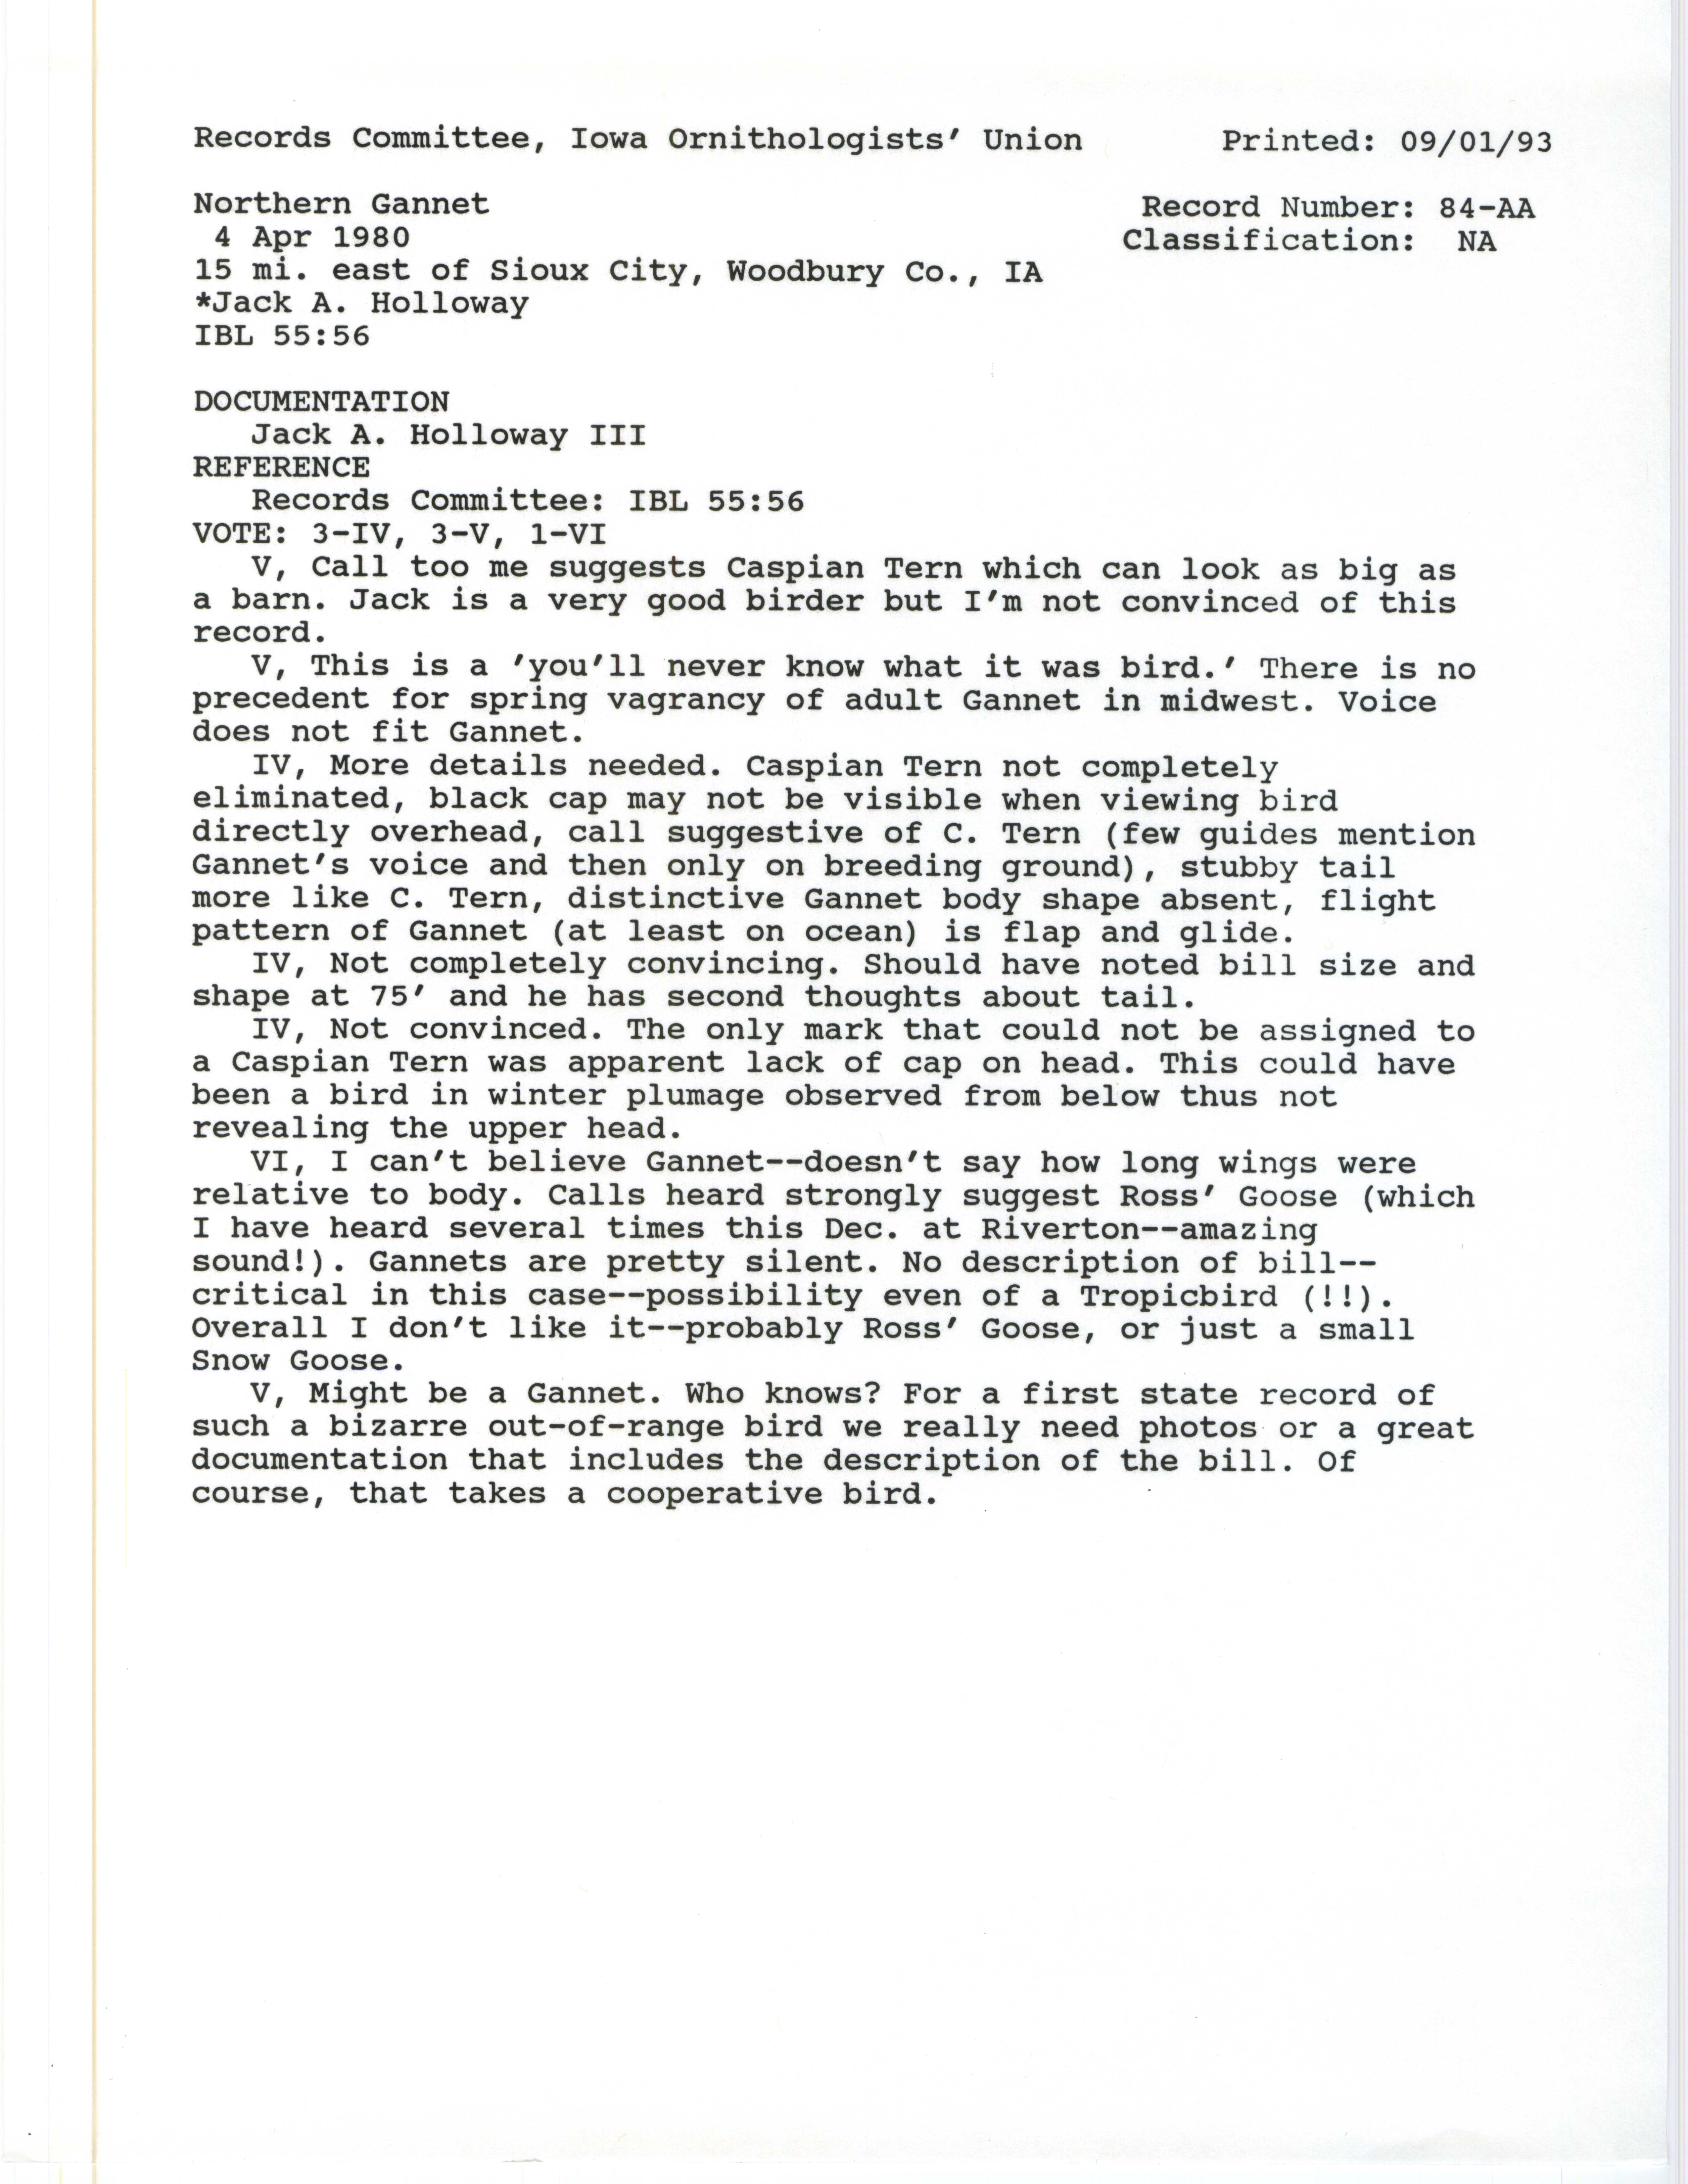 Records Committee review for rare bird sighting for Northern Gannet at Sioux City, 1980